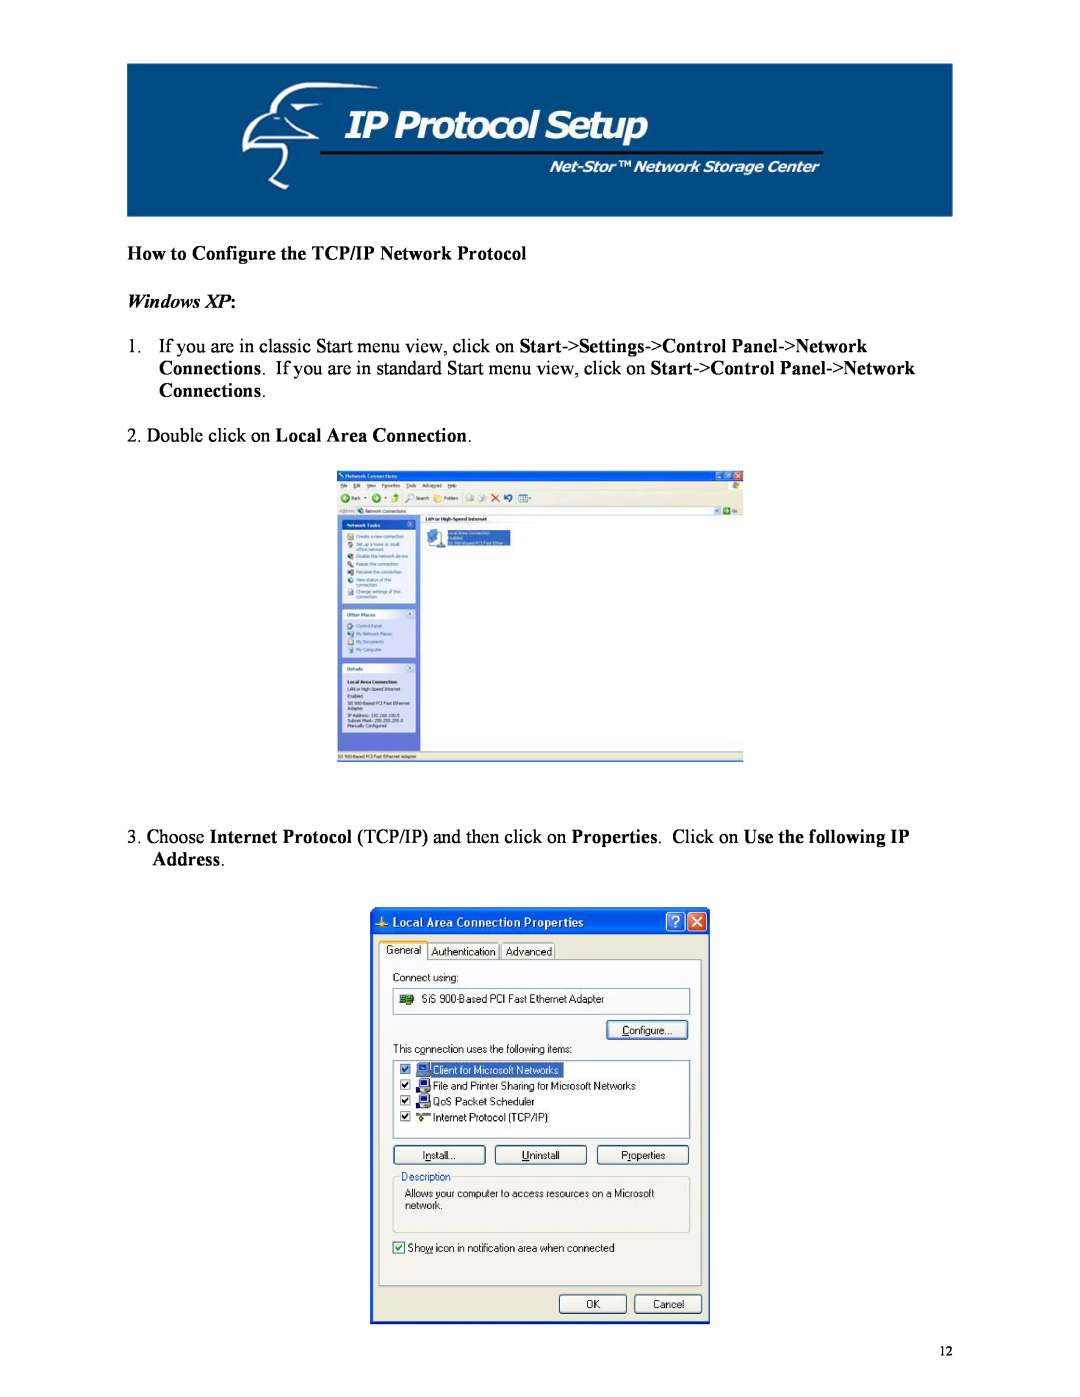 Hawking Technology HNAS1 How to Configure the TCP/IP Network Protocol, Windows XP, Double click on Local Area Connection 